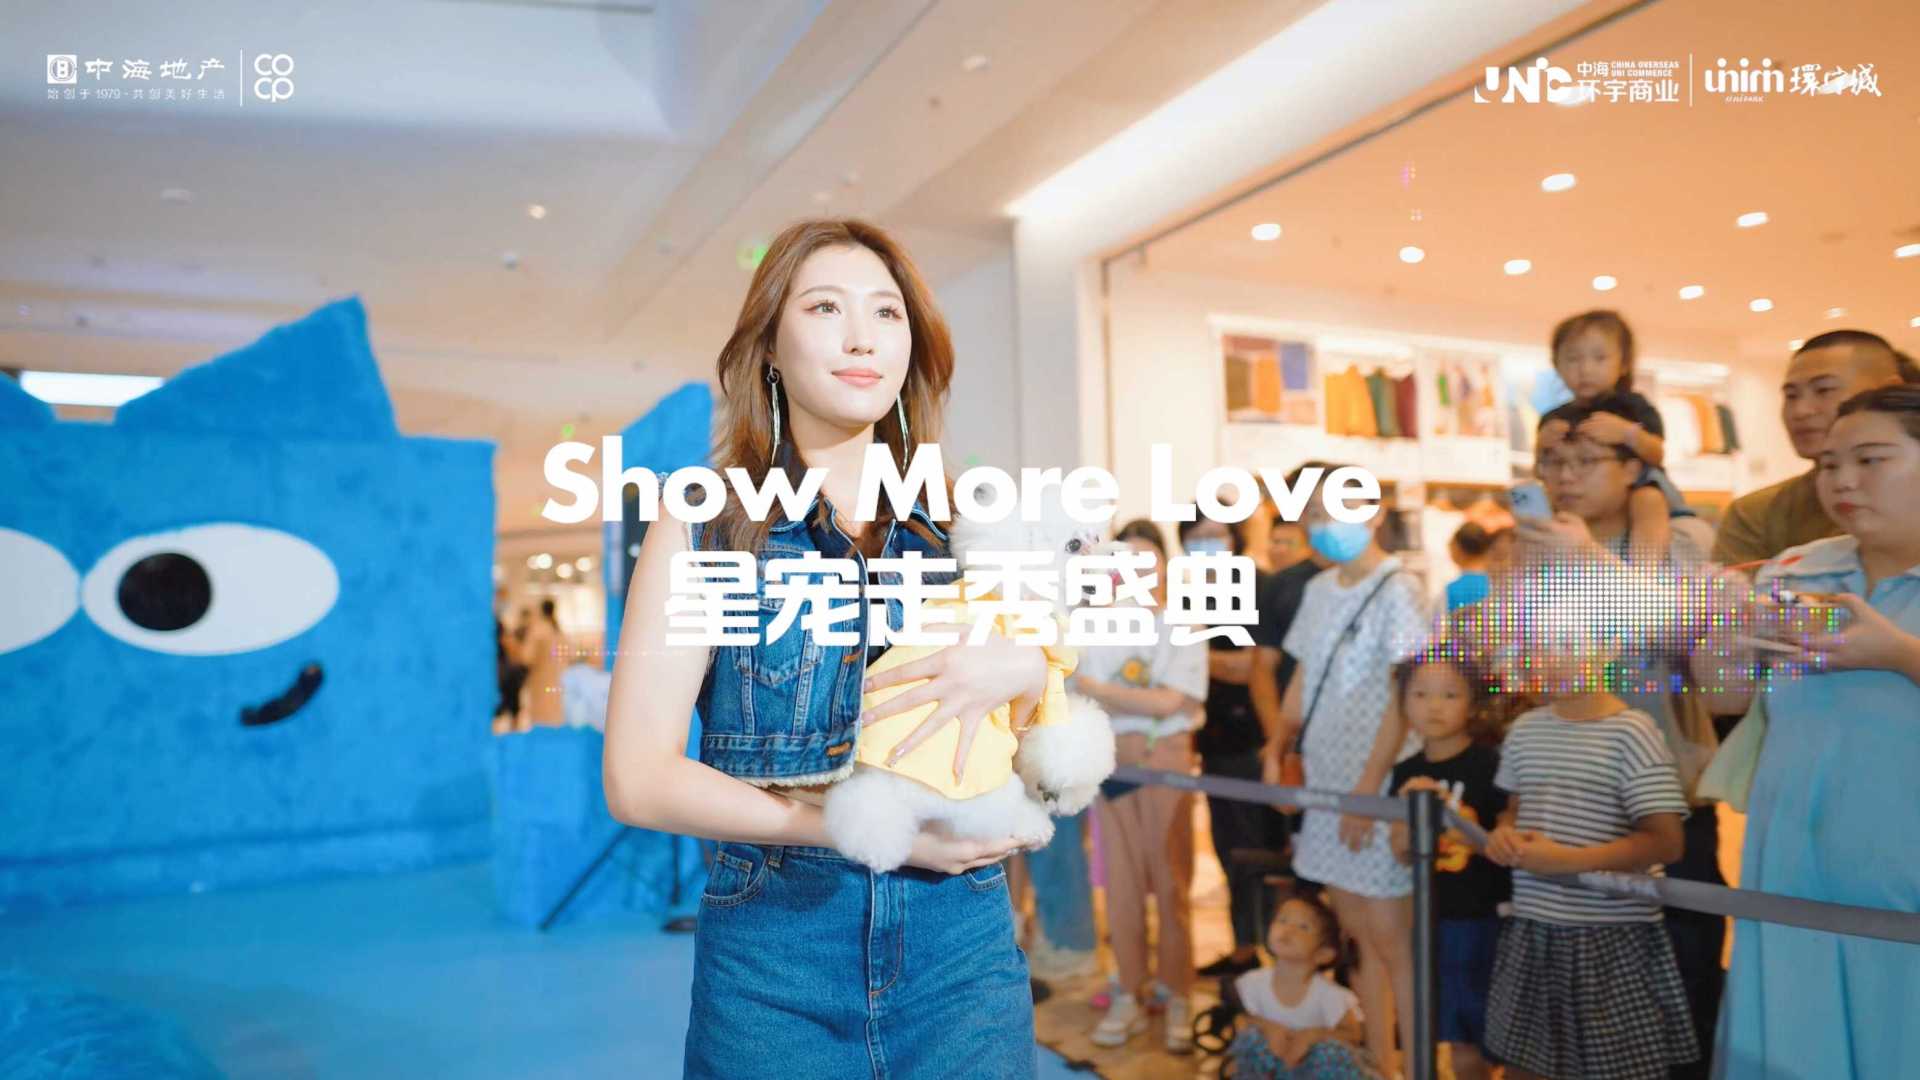 Show More Love 携宠撒欢 萌力集结 「一分钟活动快剪」